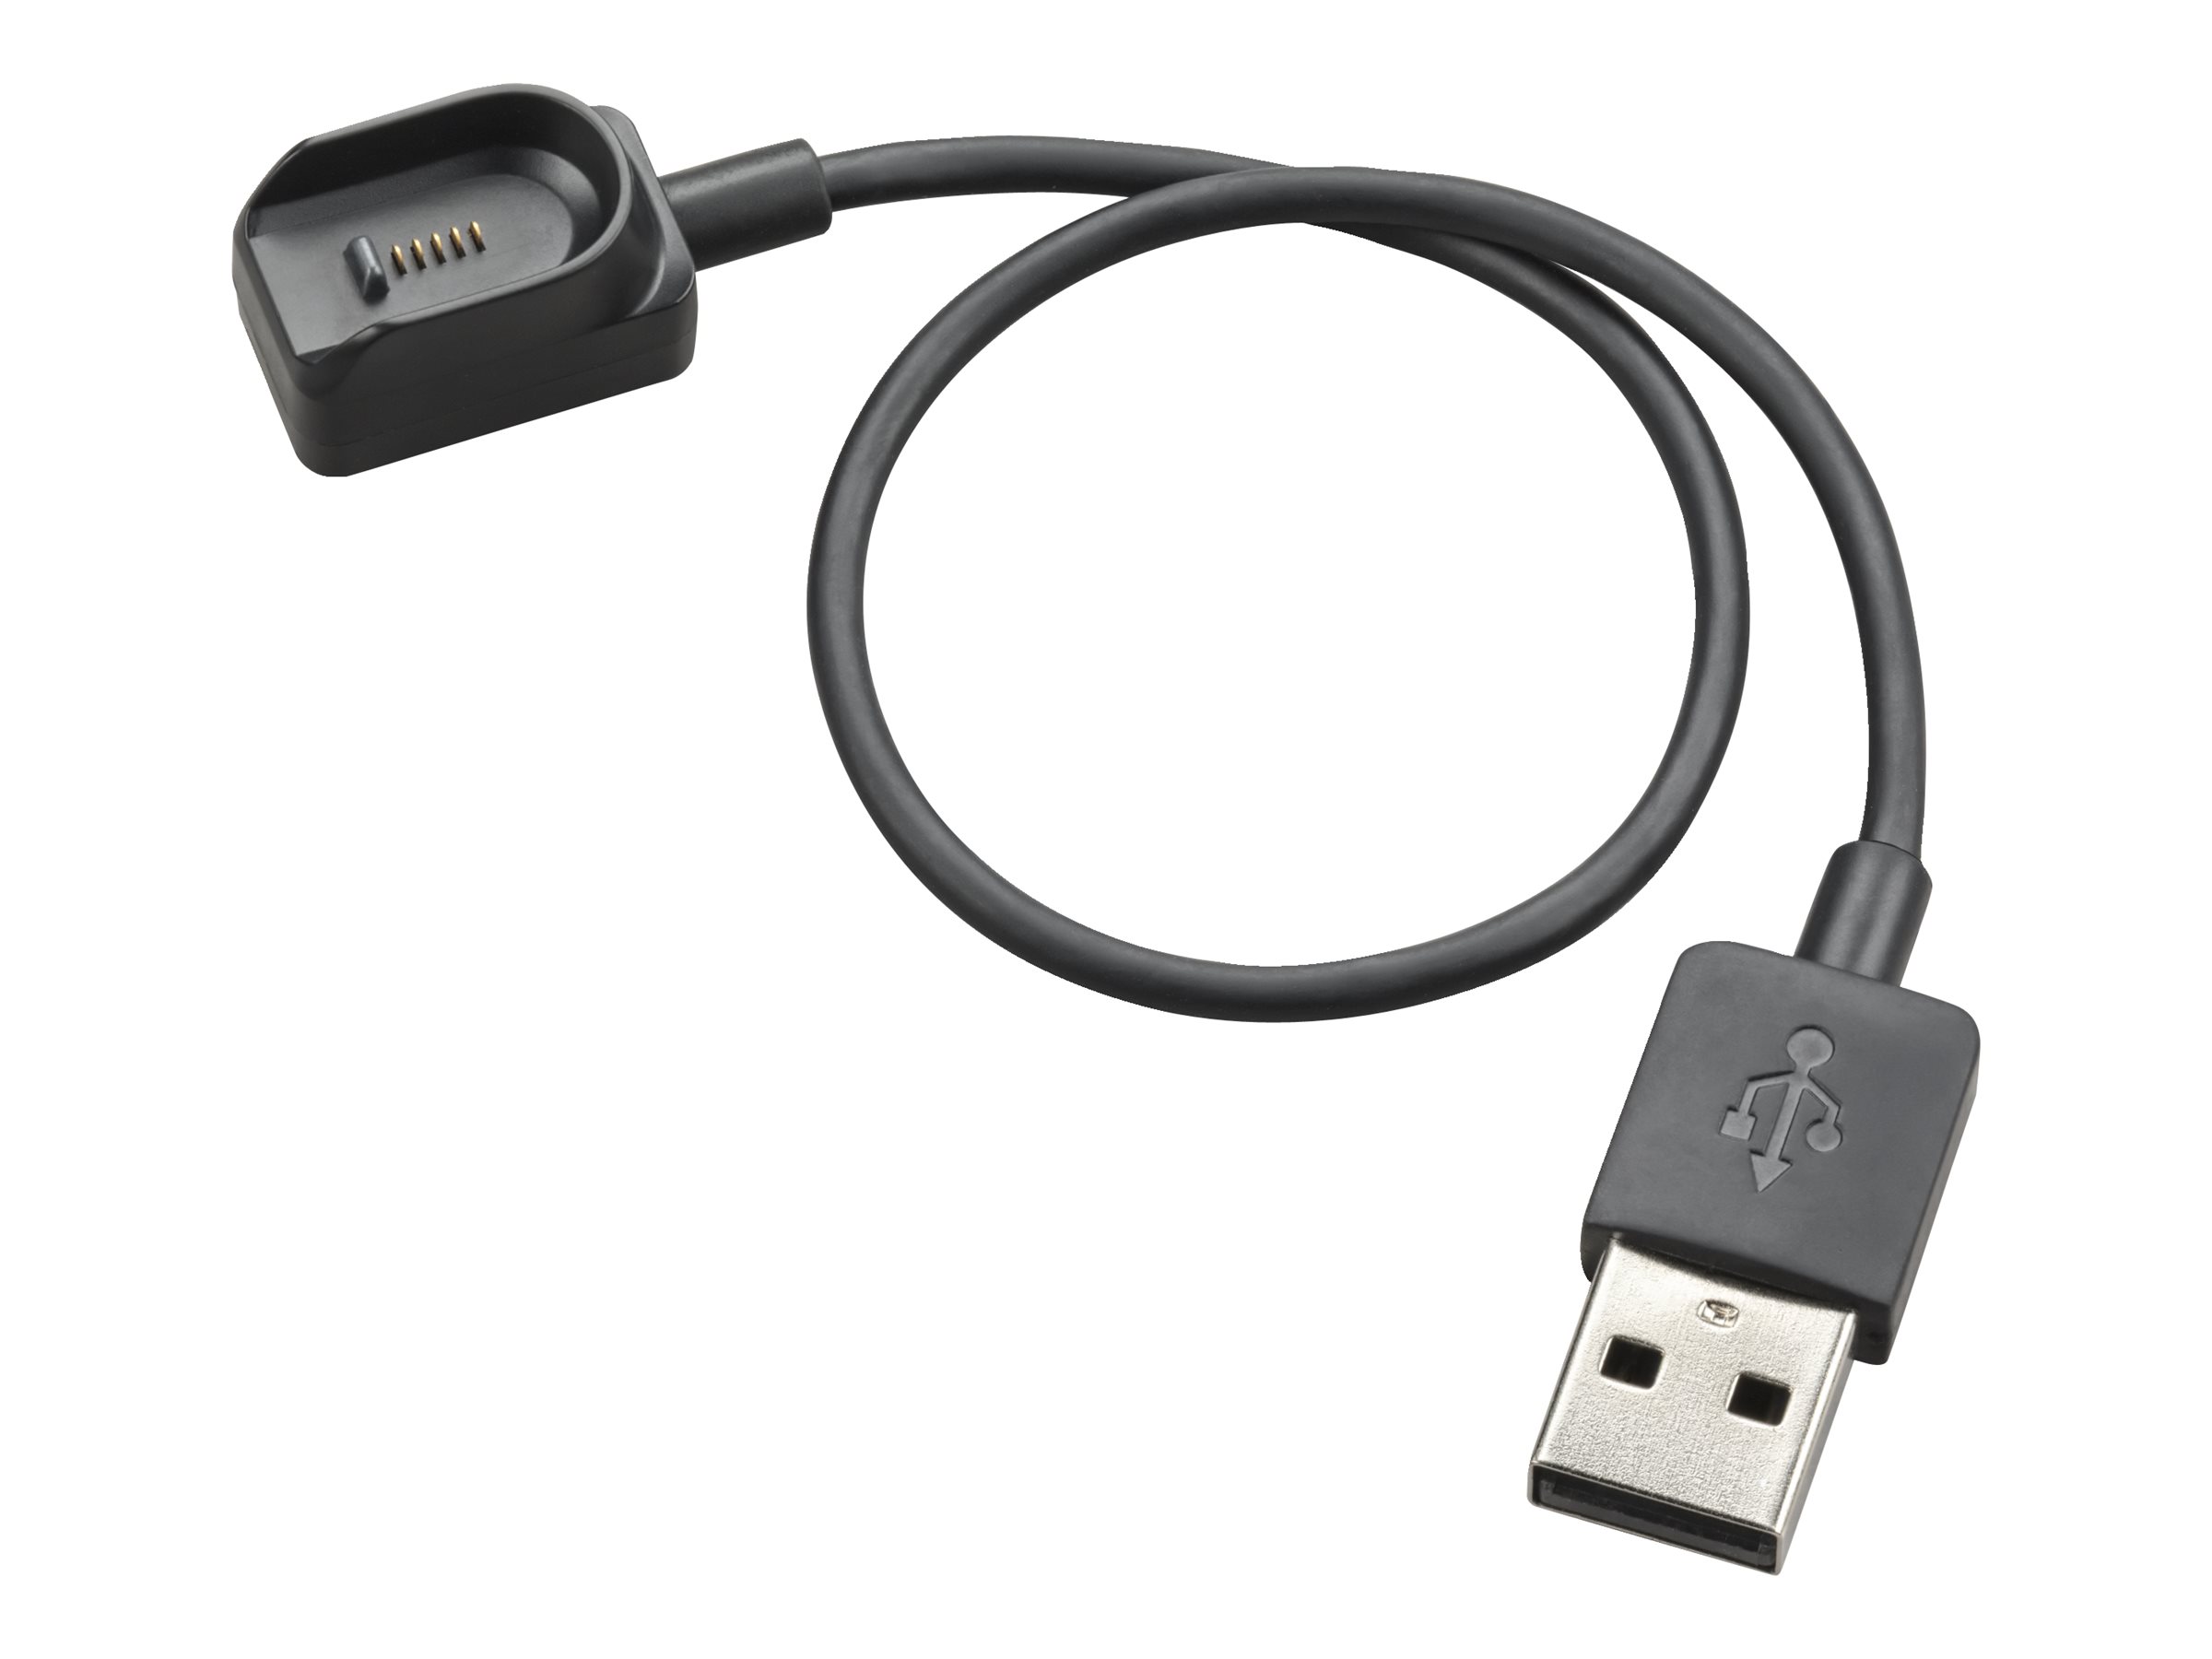 HP Poly Voyager Legend Charging Cable USB-A